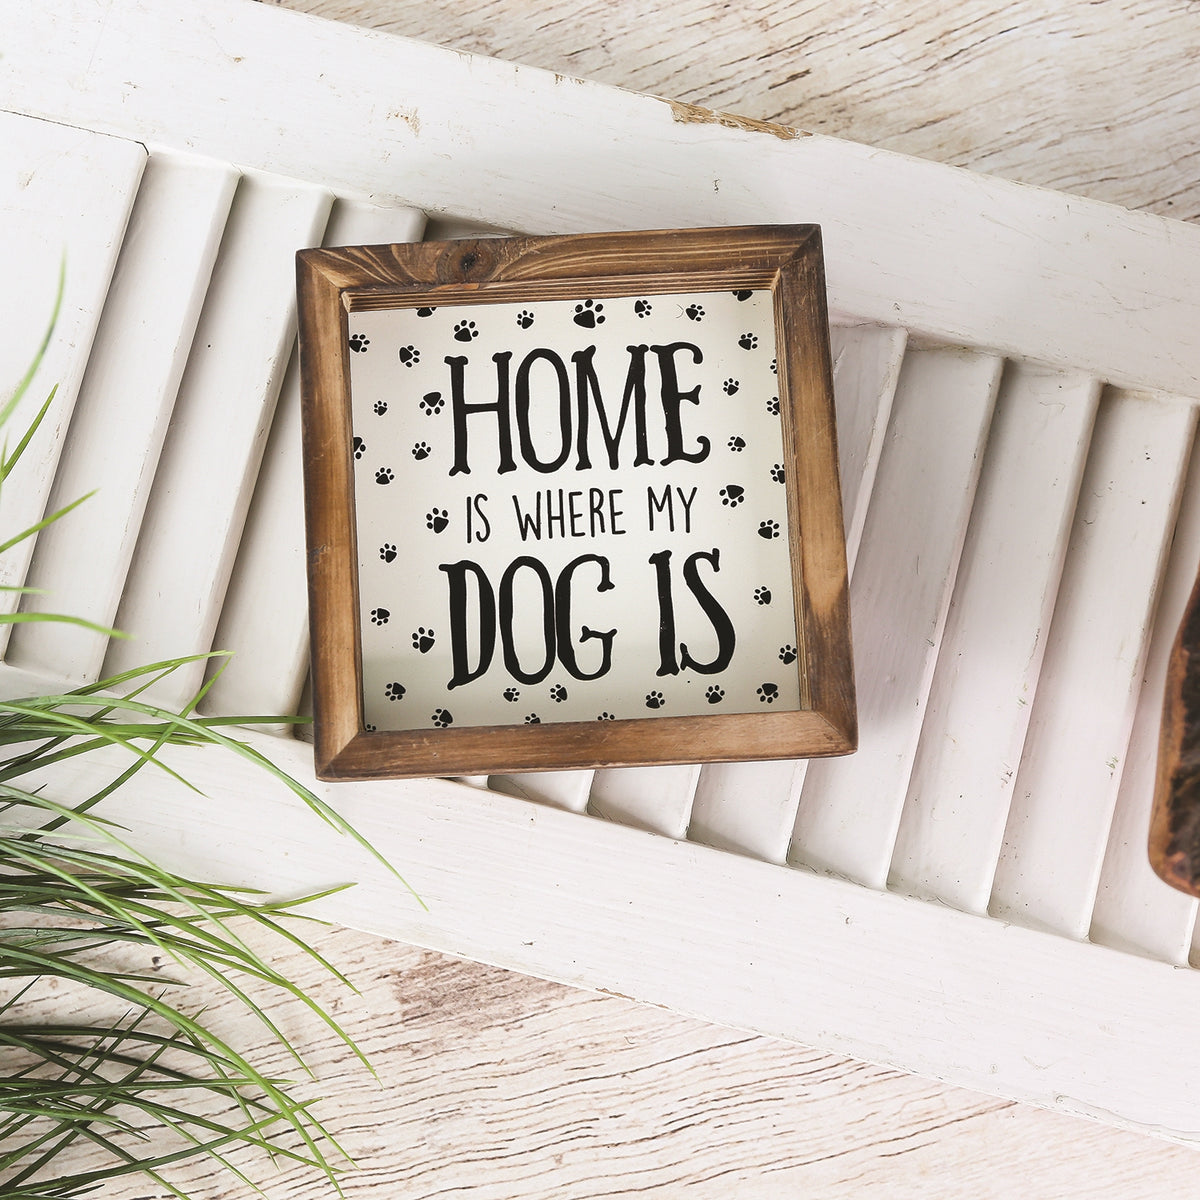 WOOD PLAQUE "HOME IS WHERE MY DOG IS"